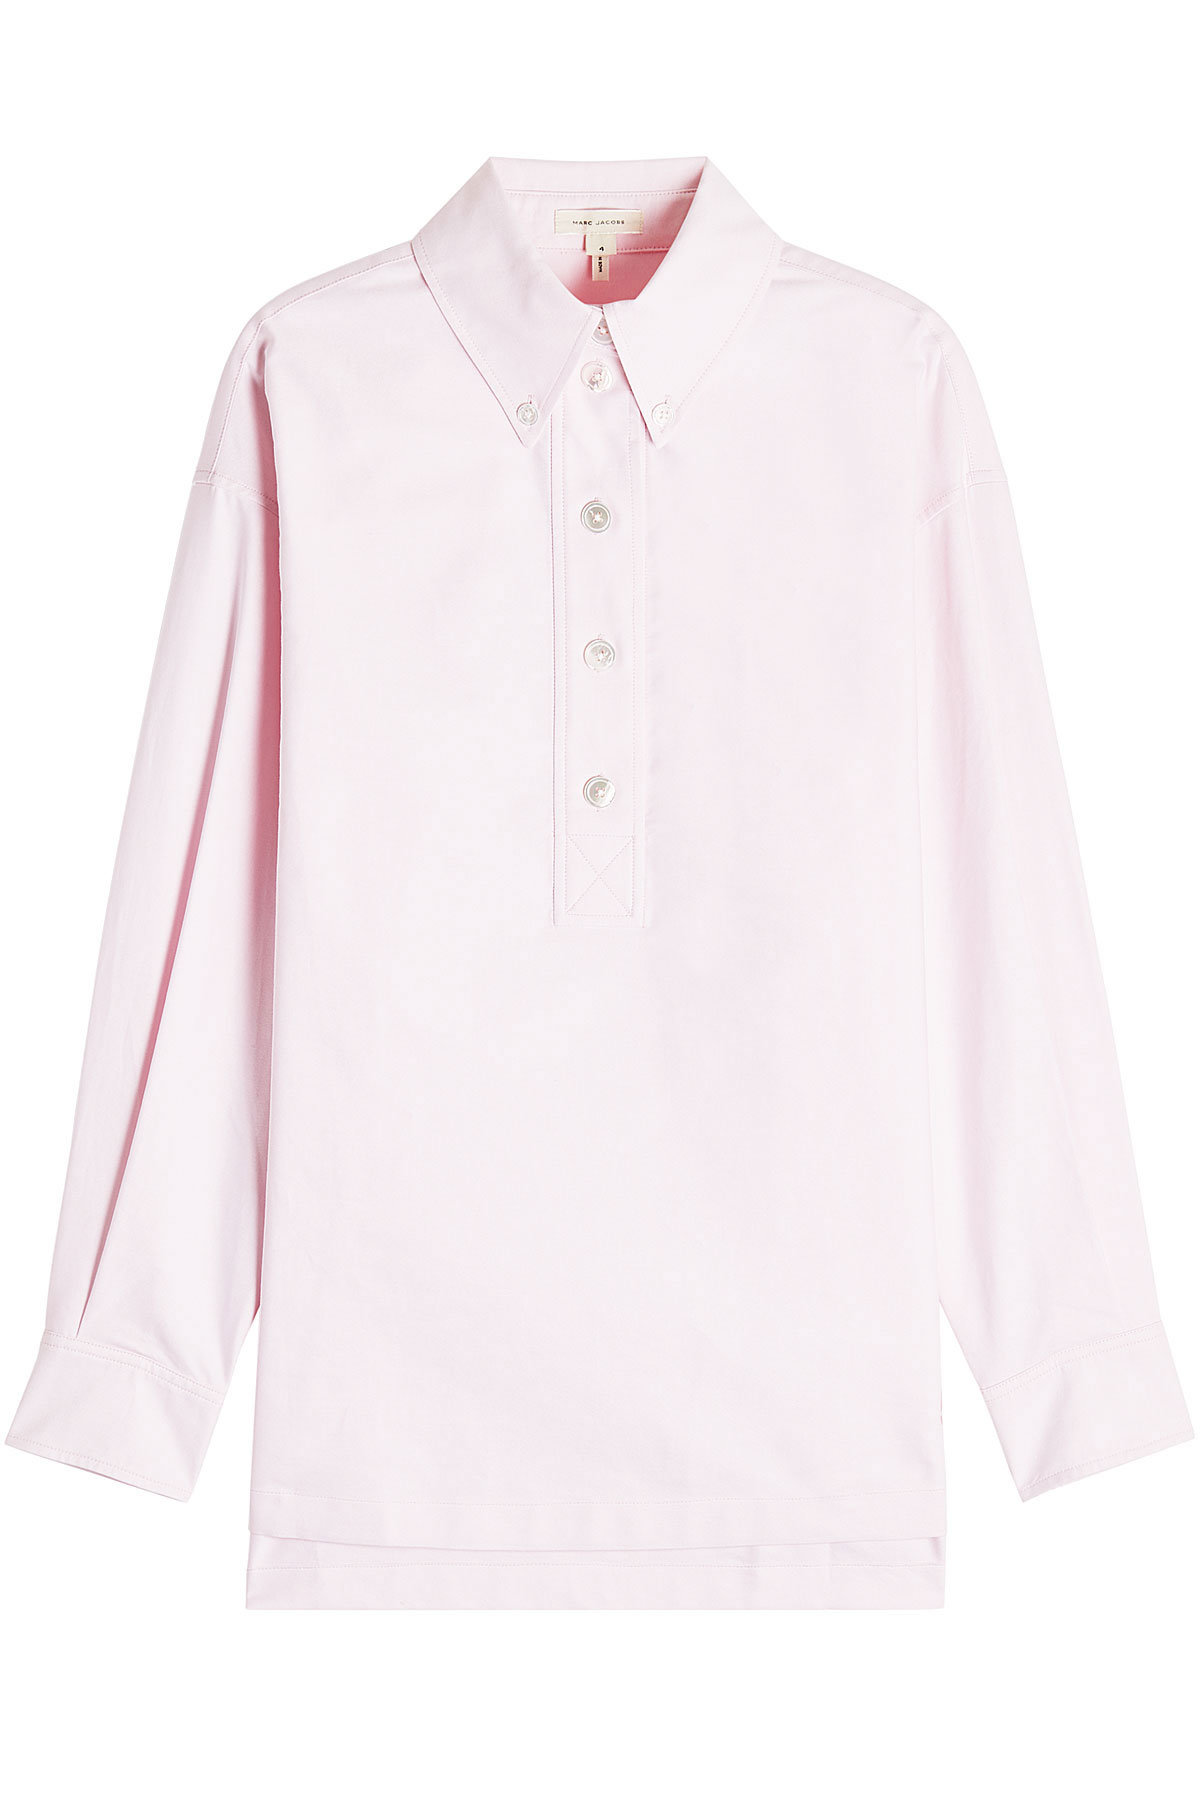 Oversized Cotton Blouse by Marc Jacobs